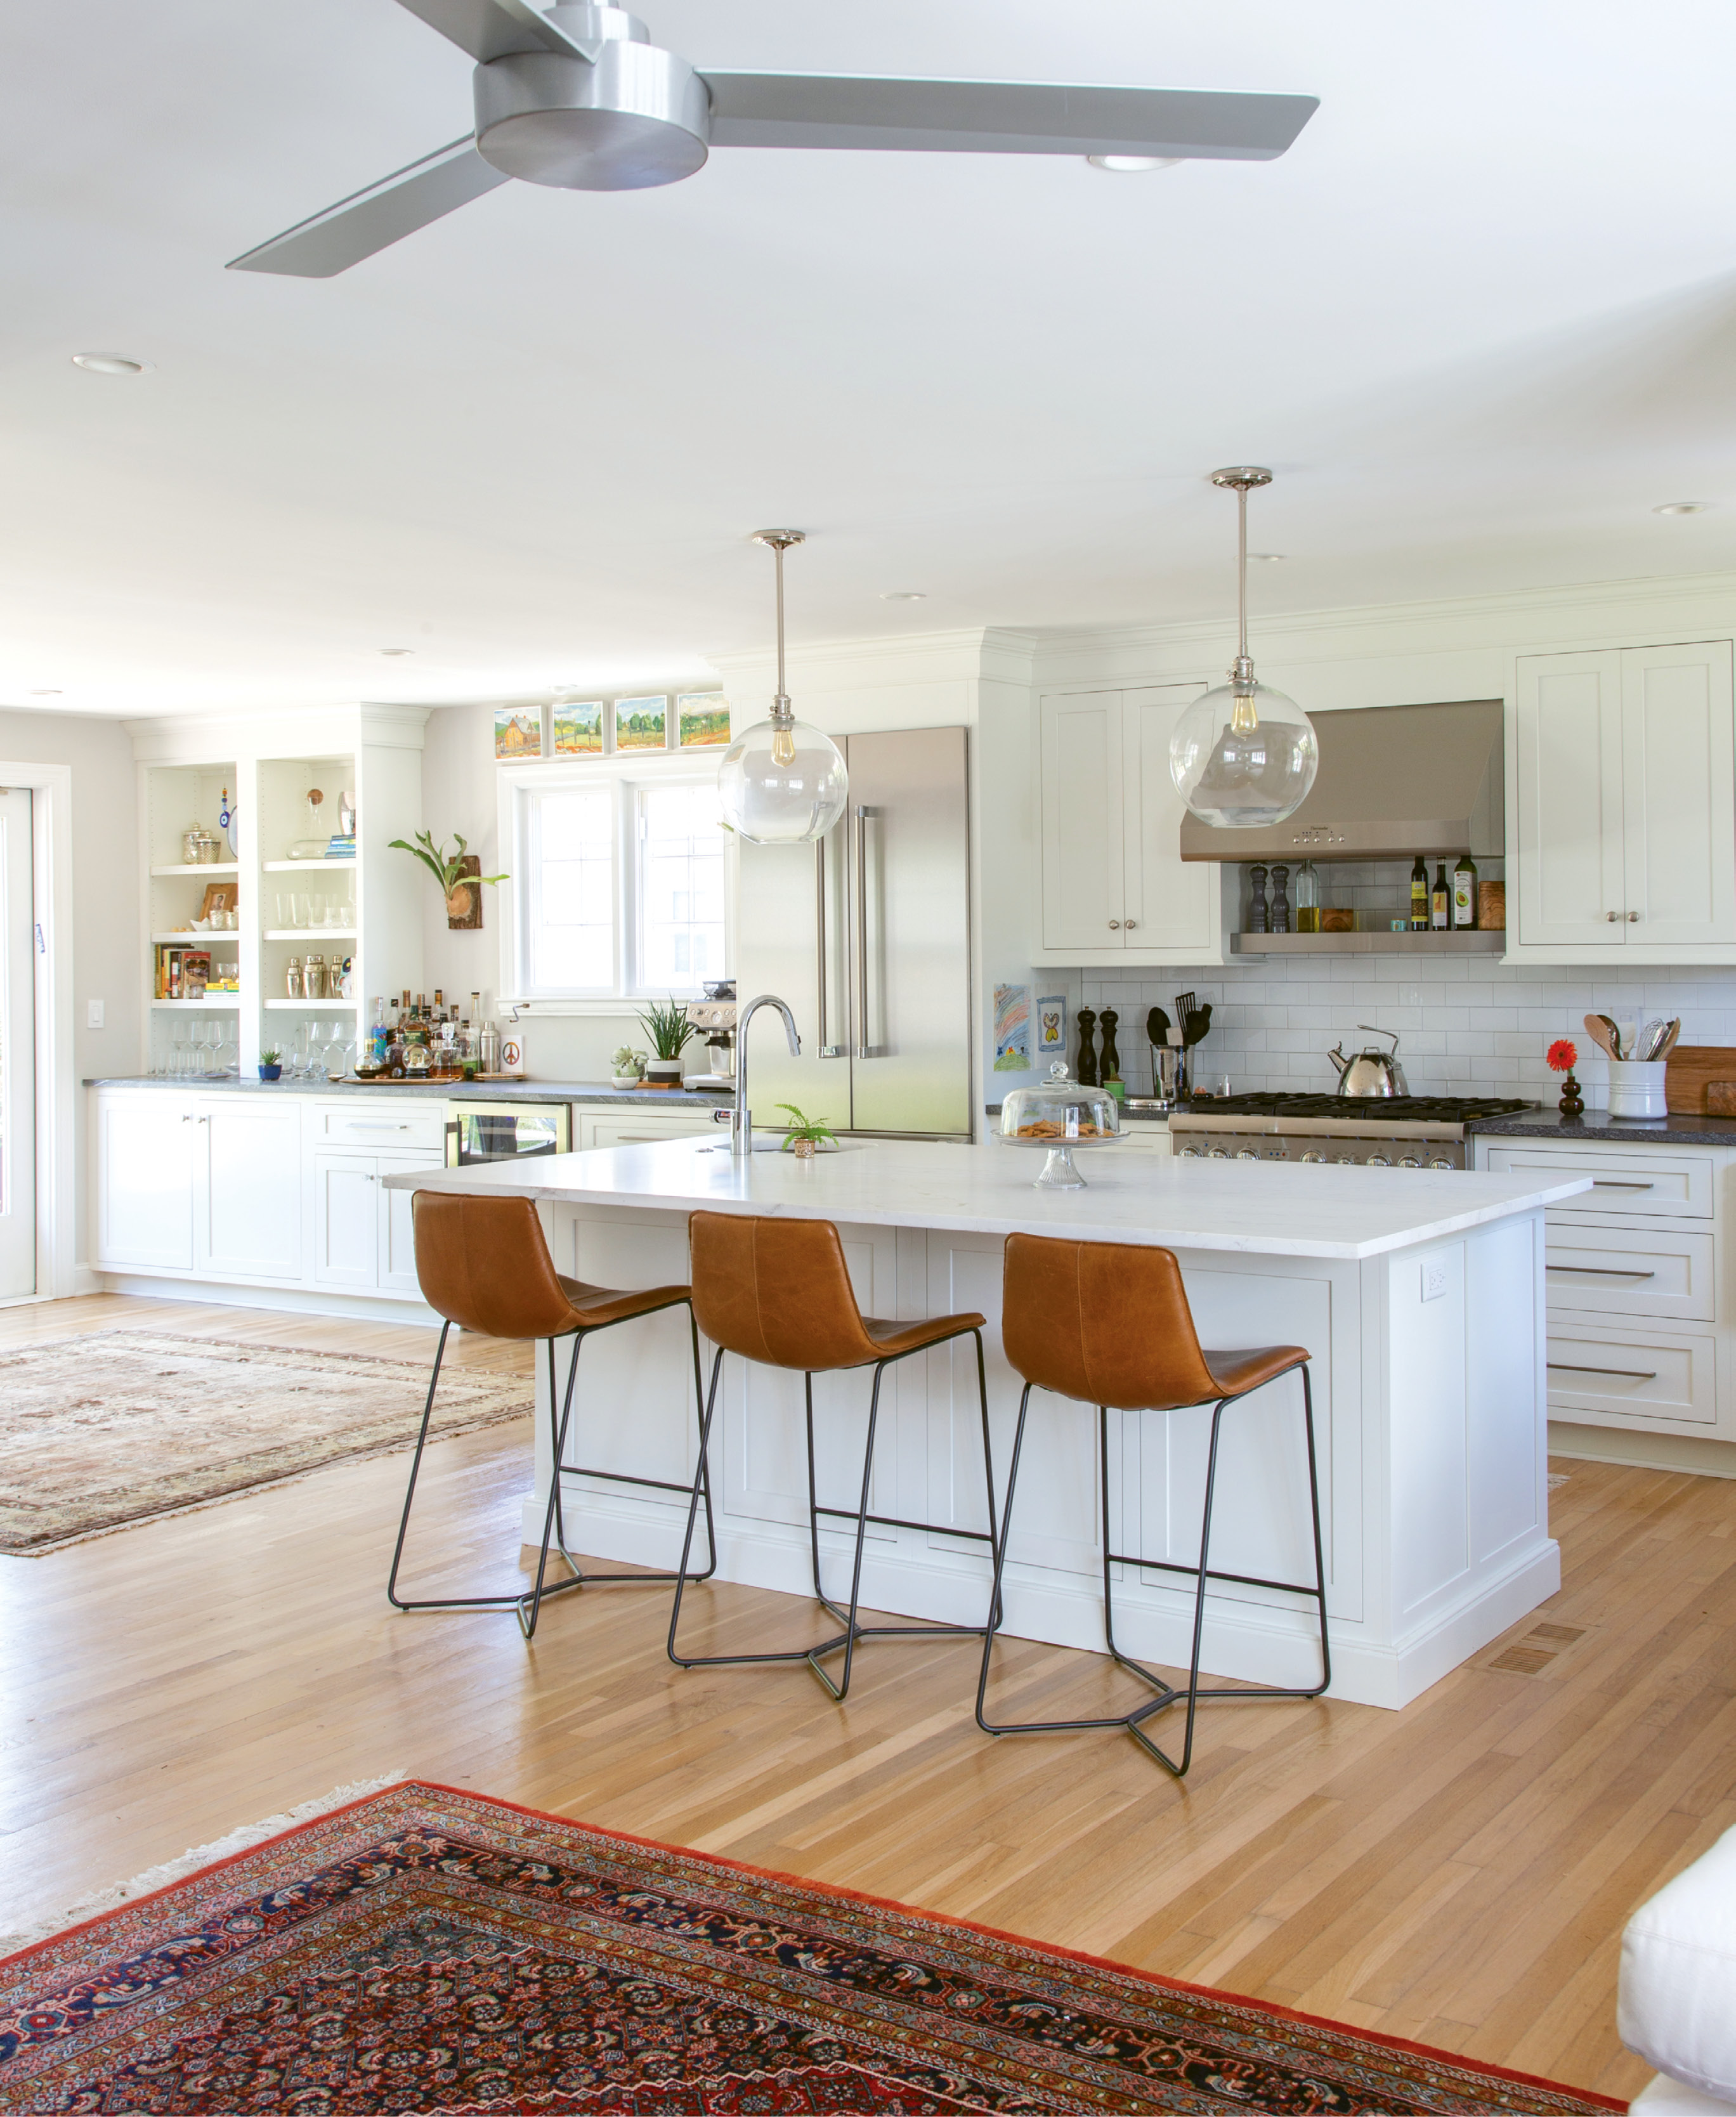 CLEAN SLATE: This Wagener Terrace home’s modern kitchen may be picture-perfect today (with its West Elm barstools, sprawling marble island, and pristine subway tile), but less than two years ago it was dark, dingy, and seriously outdated.